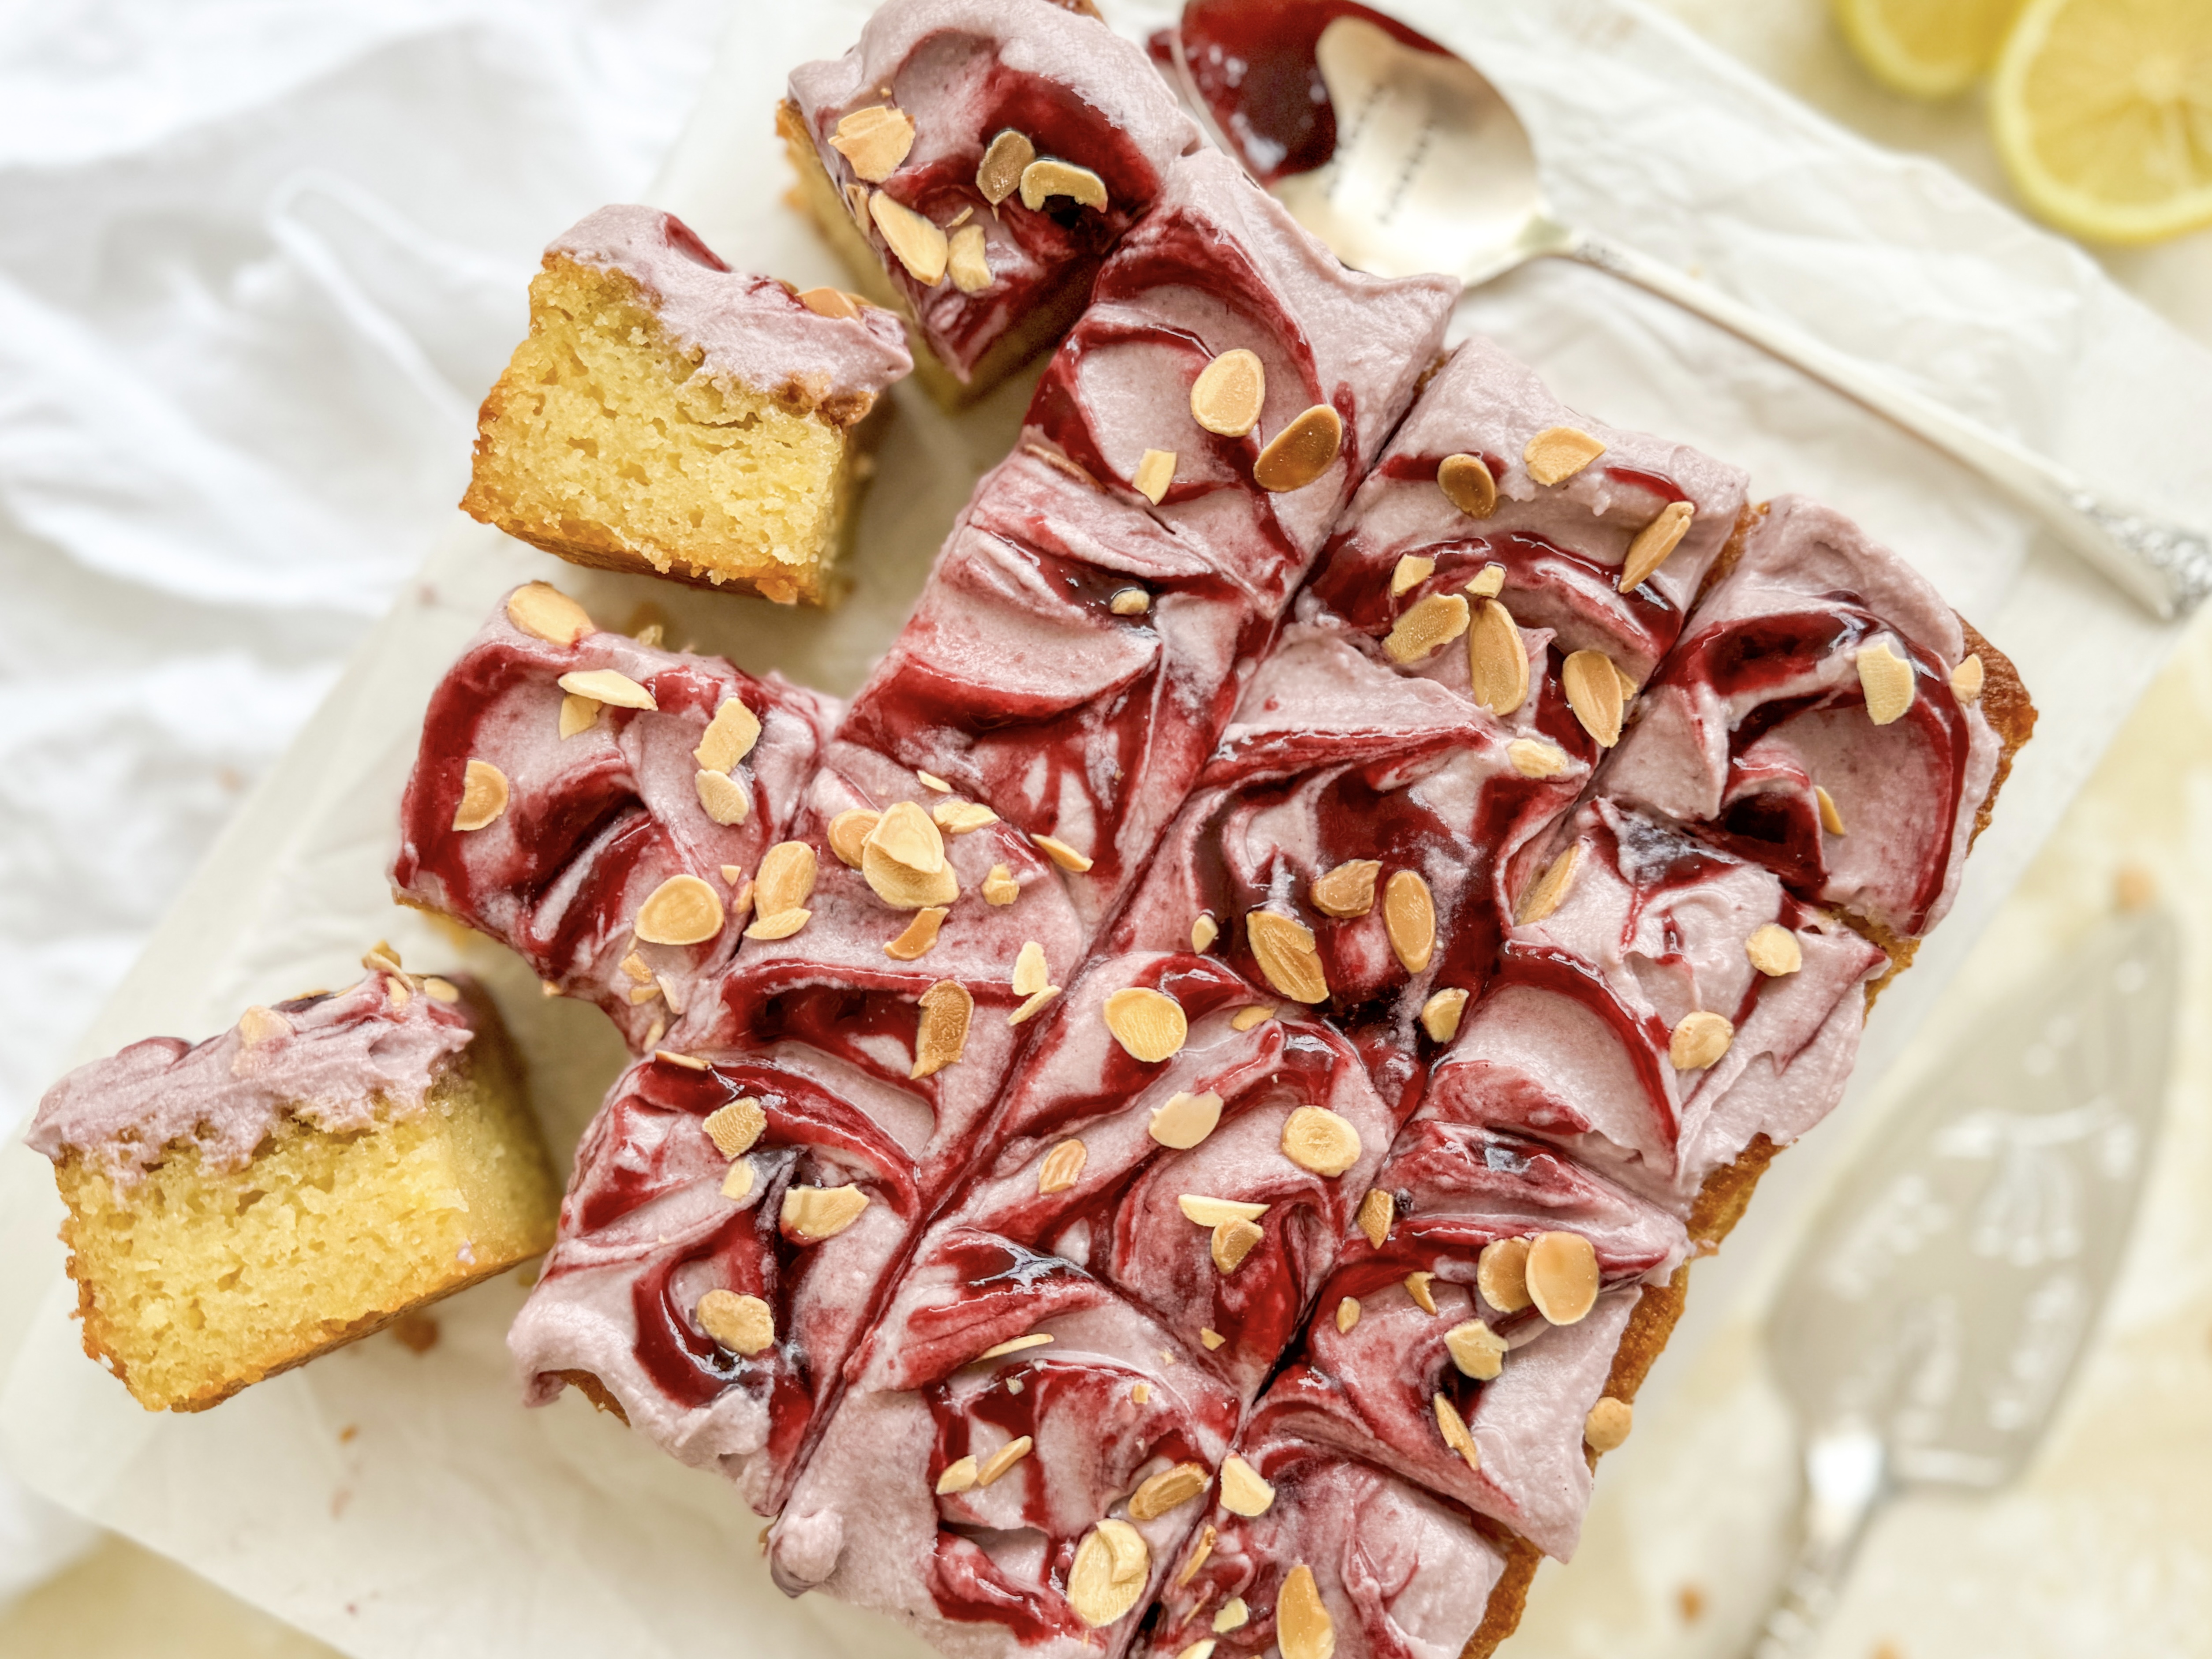 Photograph of Lemon and Almond Olive Oil Slice with Blackberry Mascarpone Frosting